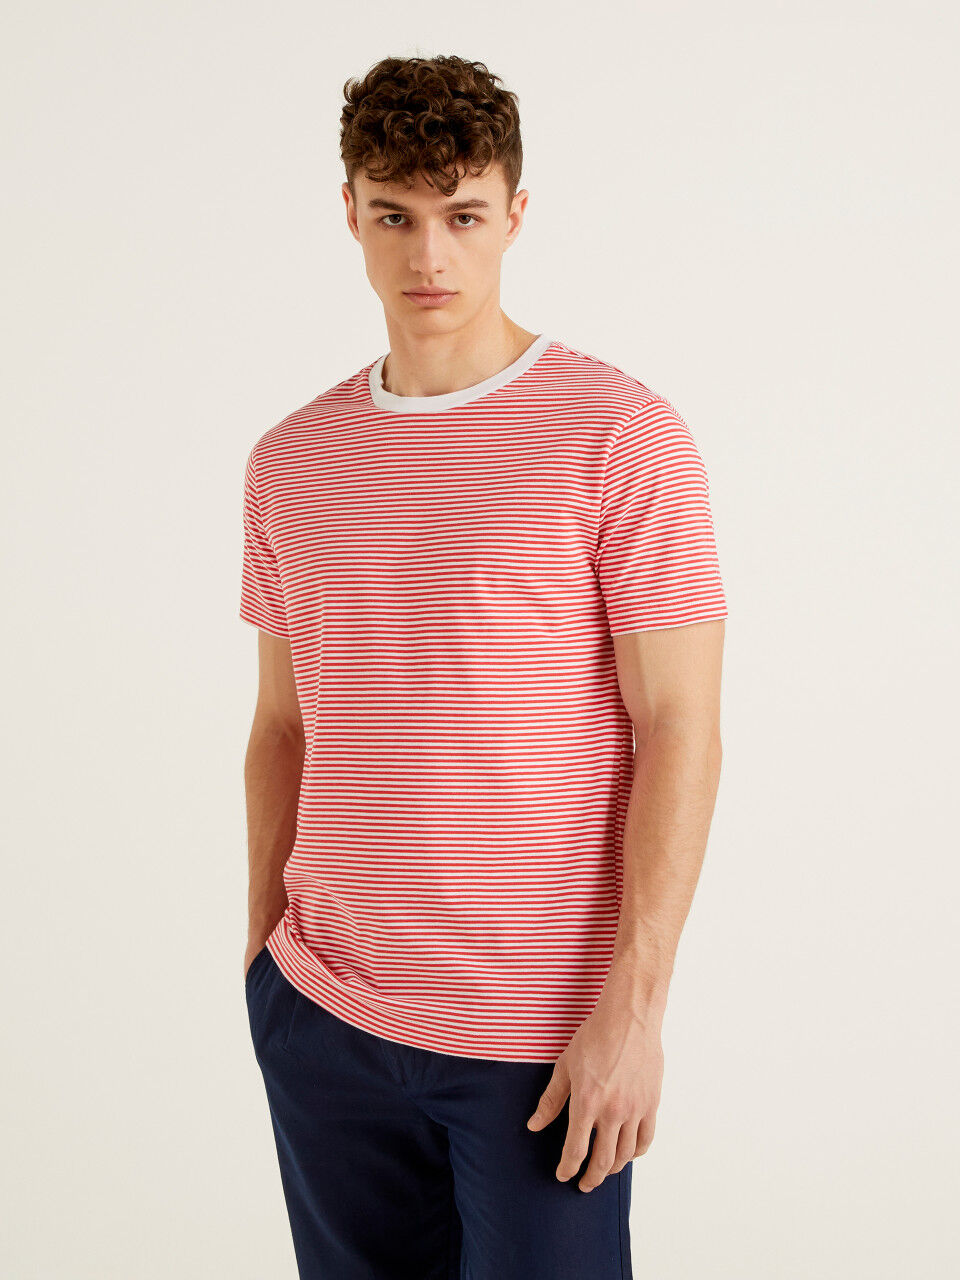 Striped t-shirt in 100% cotton